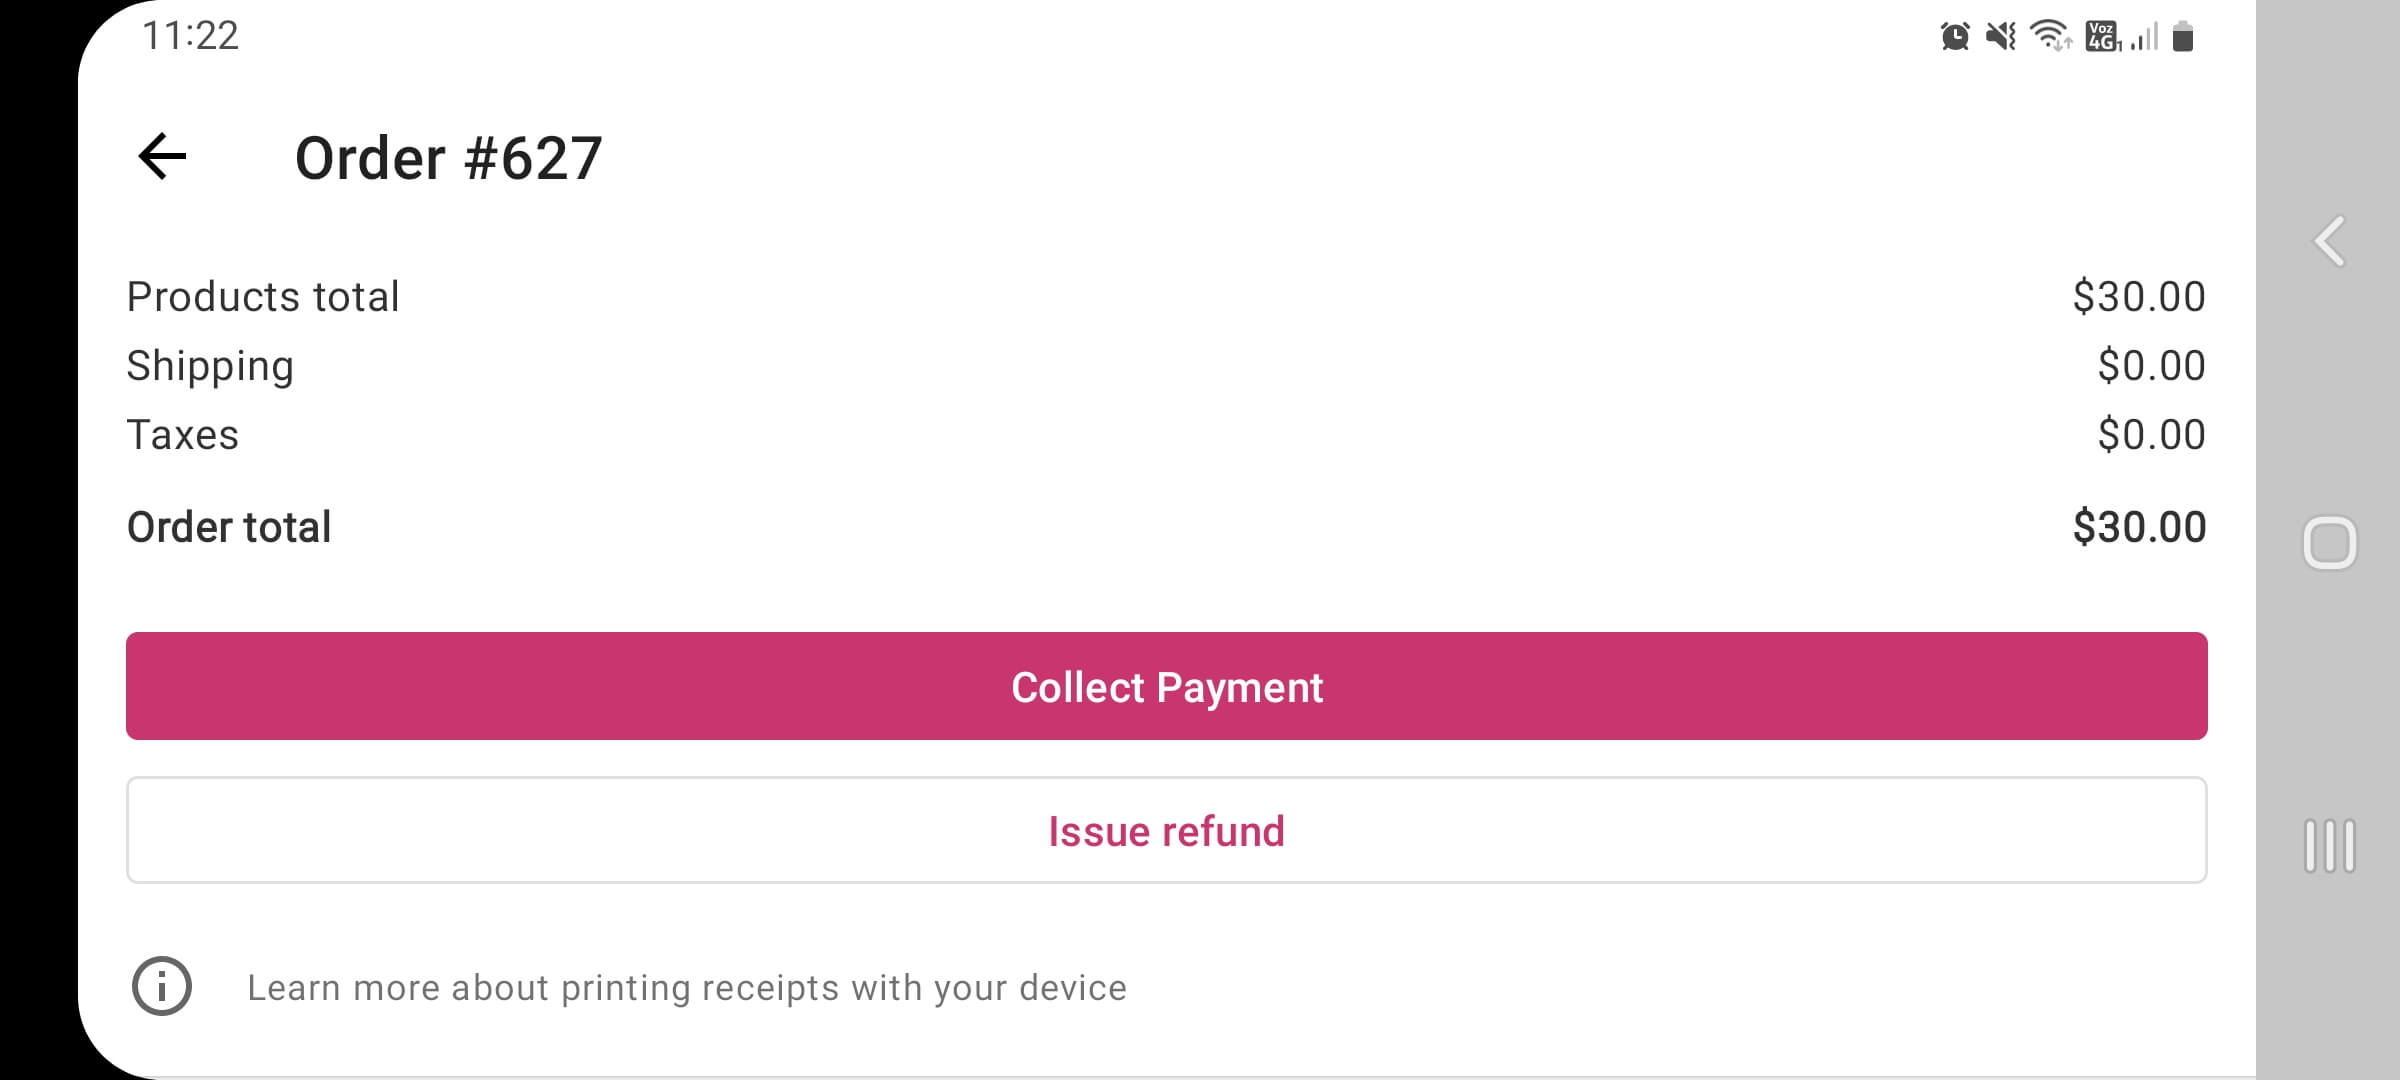 Collecting payment for a WooCommerce order using the app